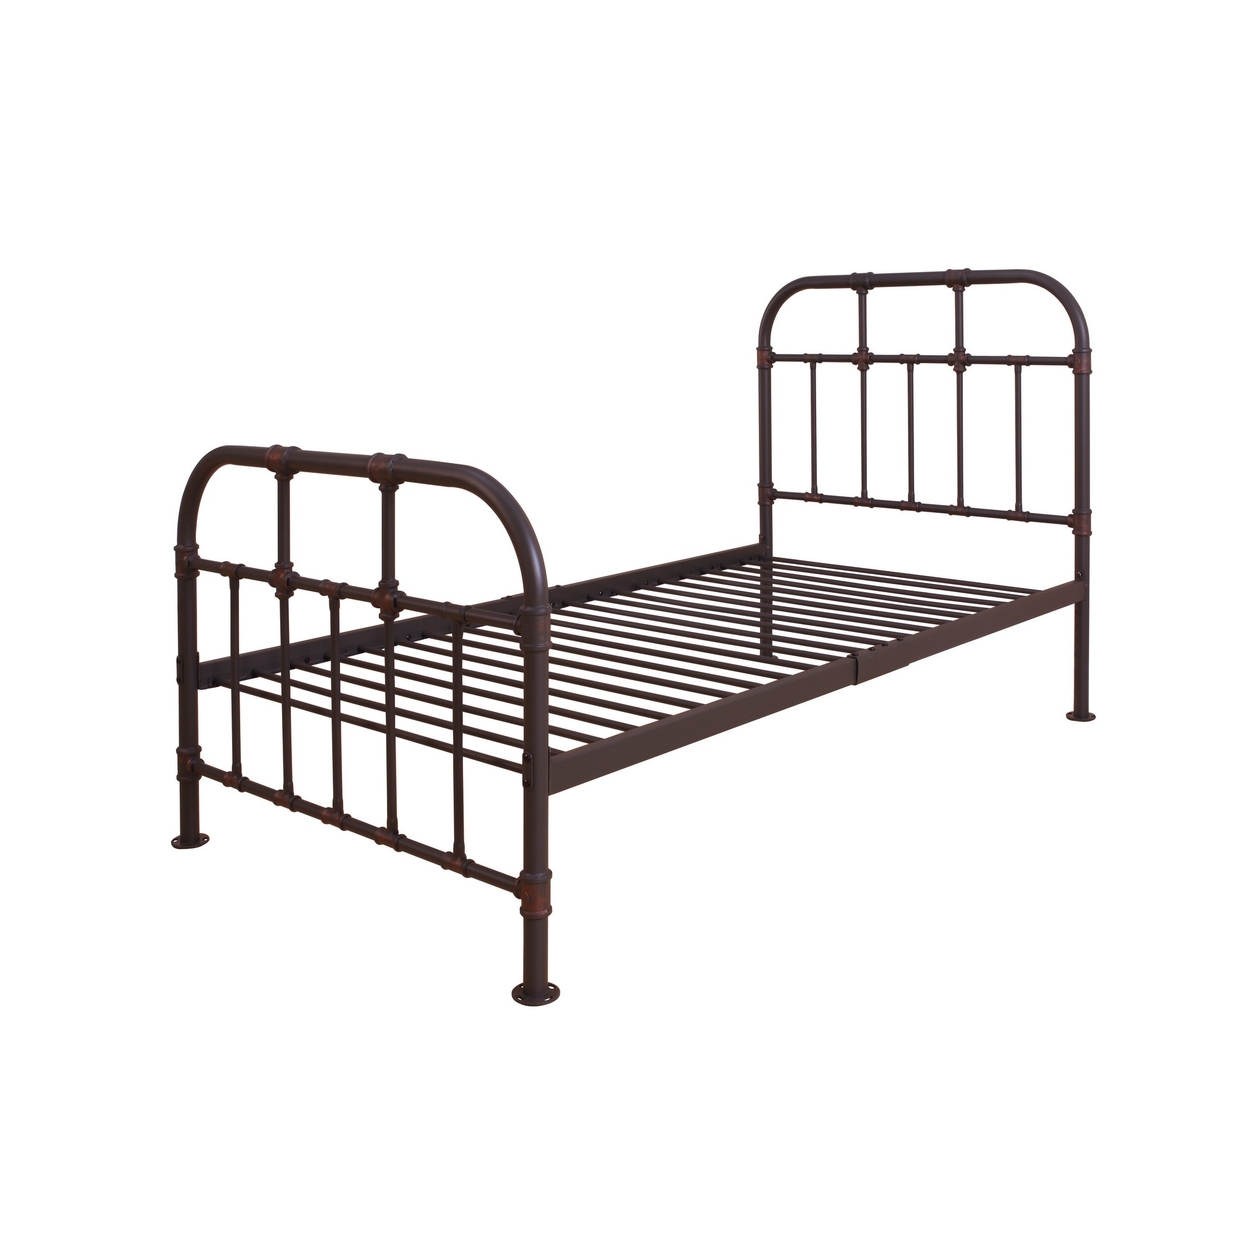 Industrial Style Metal Twin Size Bed With Pipe Inspired Frame, Brown- Saltoro Sherpi